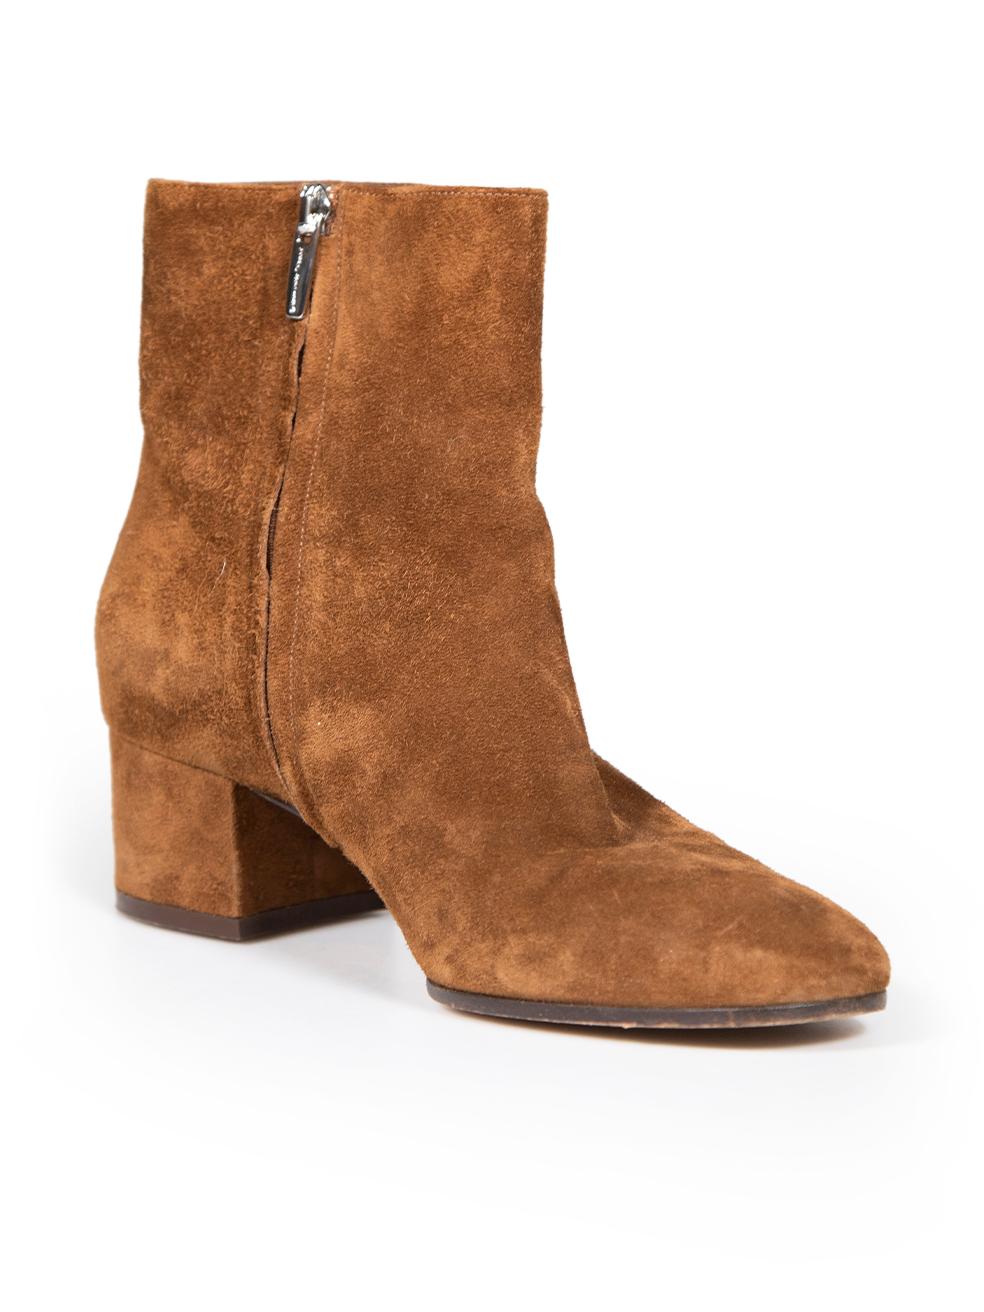 CONDITION is Very good. Minimal wear to boots is evident. Minimal wear to the left-side of the left boot and heel with abrasions to the suede on this used Gianvito Rossi designer resale item.
 
 
 
 Details
 
 
 Brown
 
 Suede
 
 Ankle boots
 
